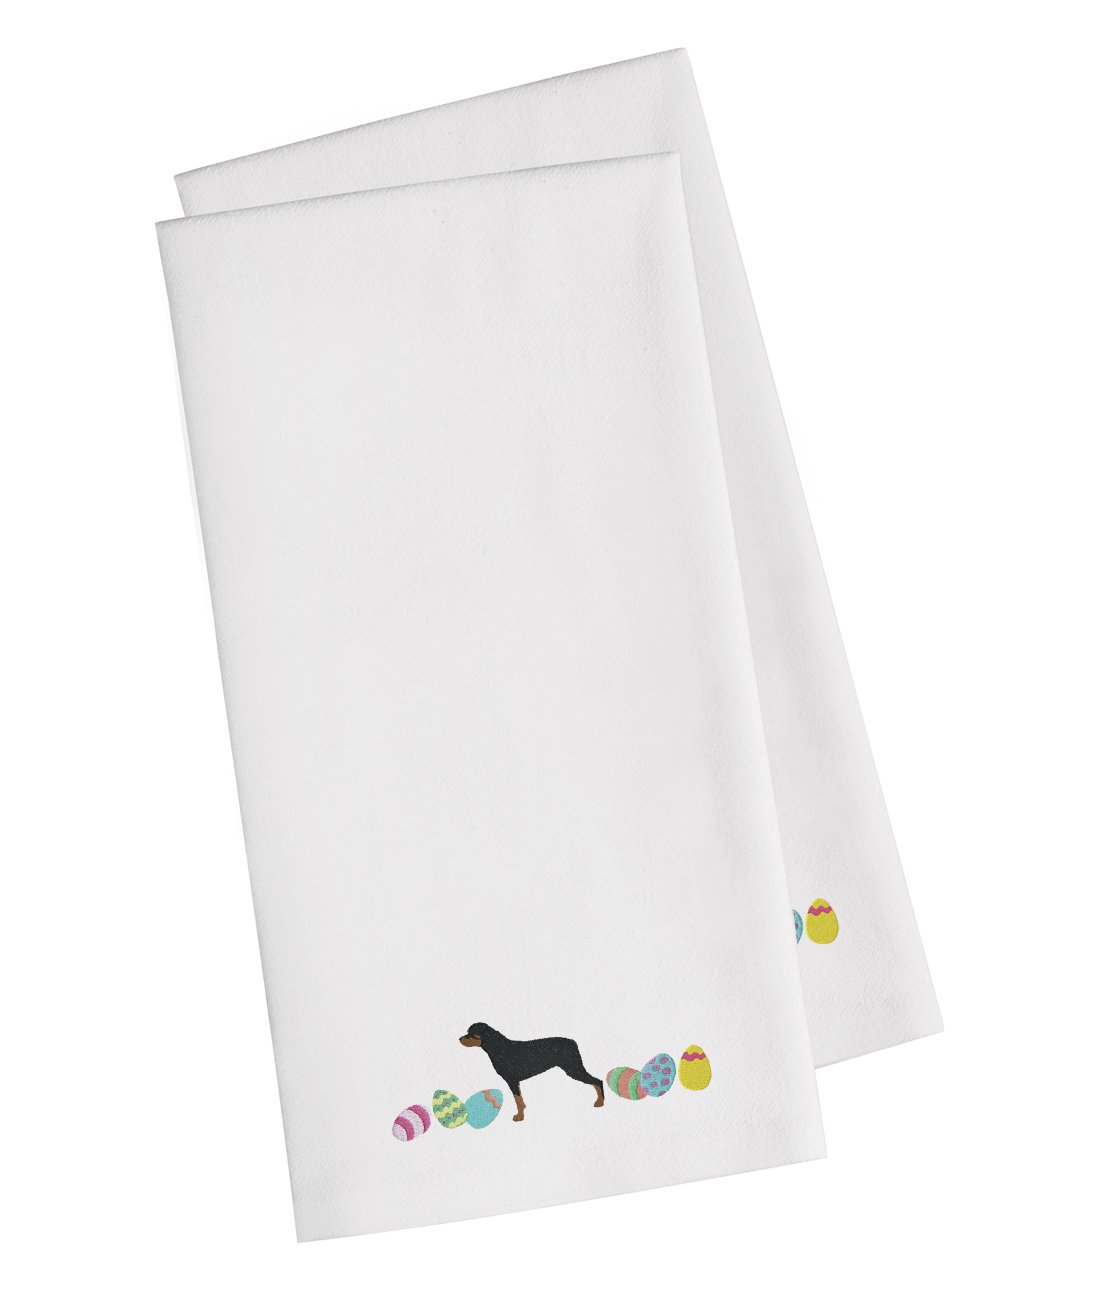 Rottweiler Easter White Embroidered Kitchen Towel Set of 2 CK1678WHTWE by Caroline's Treasures